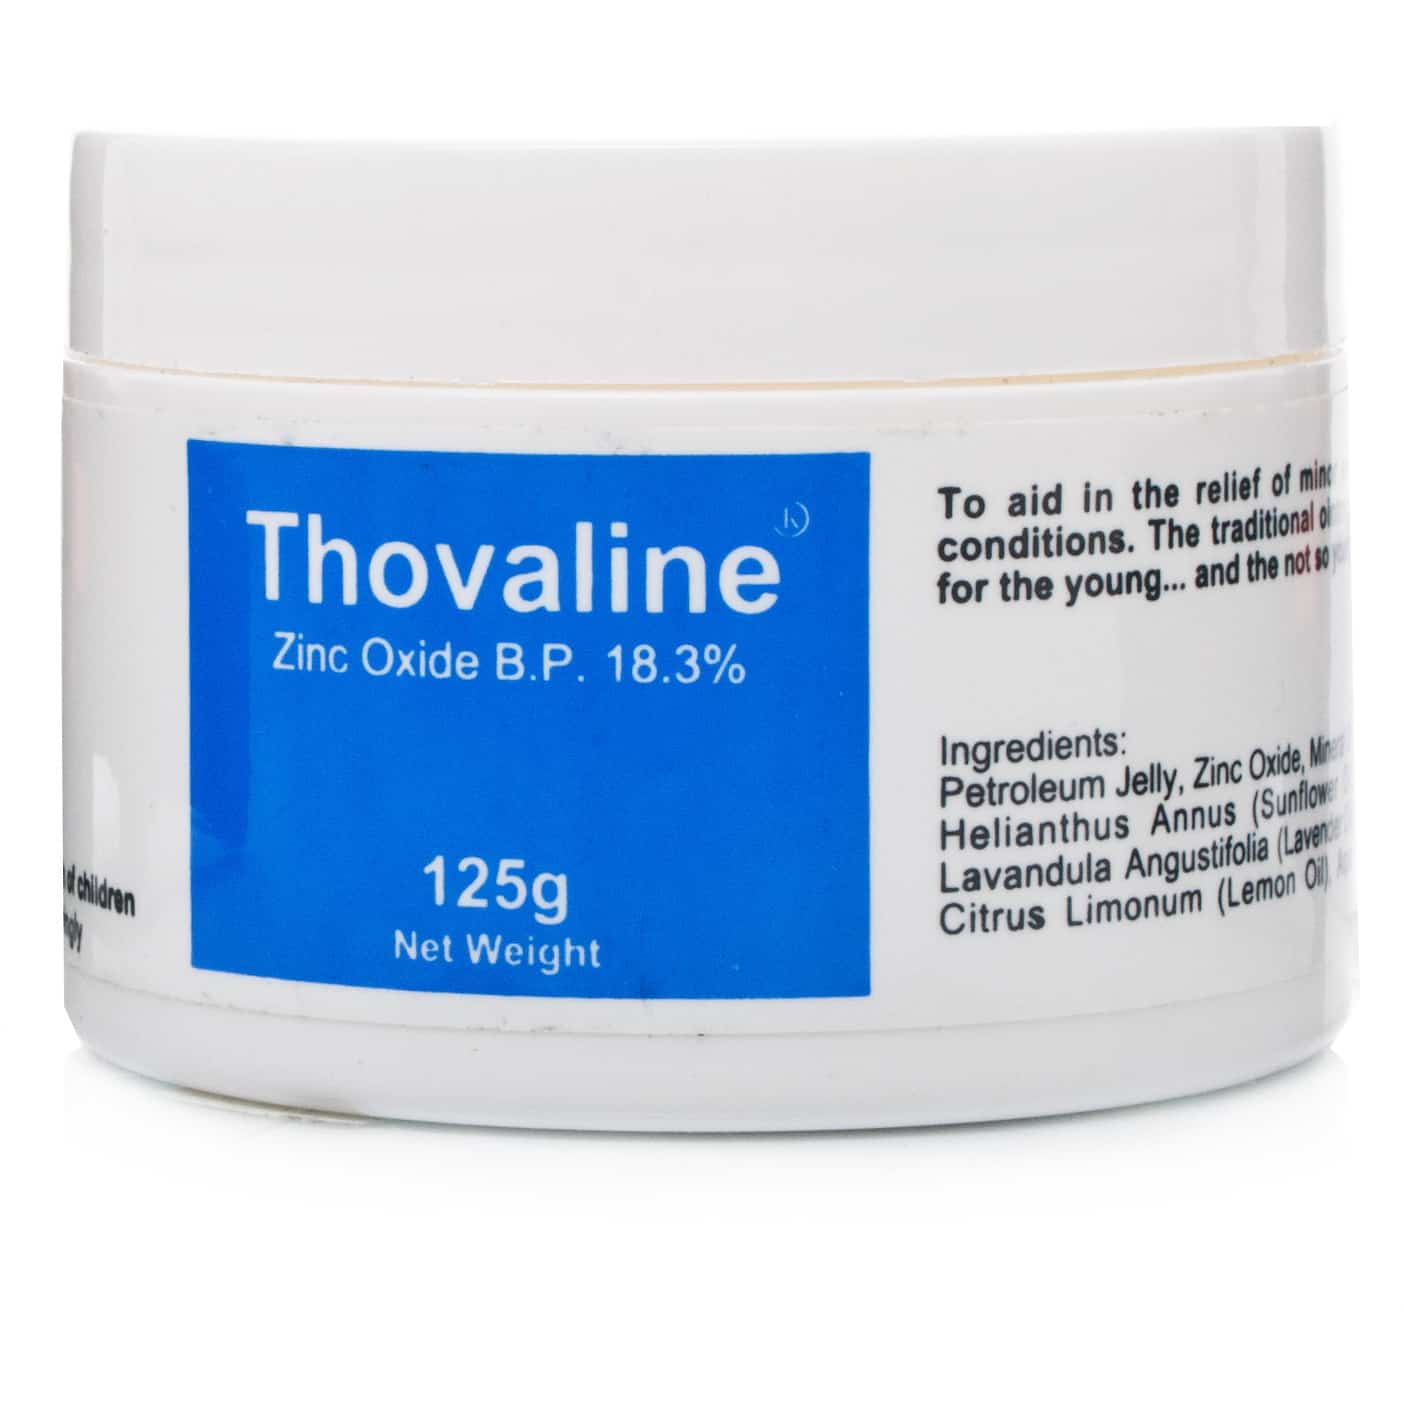 Thovaline Ointment 125g